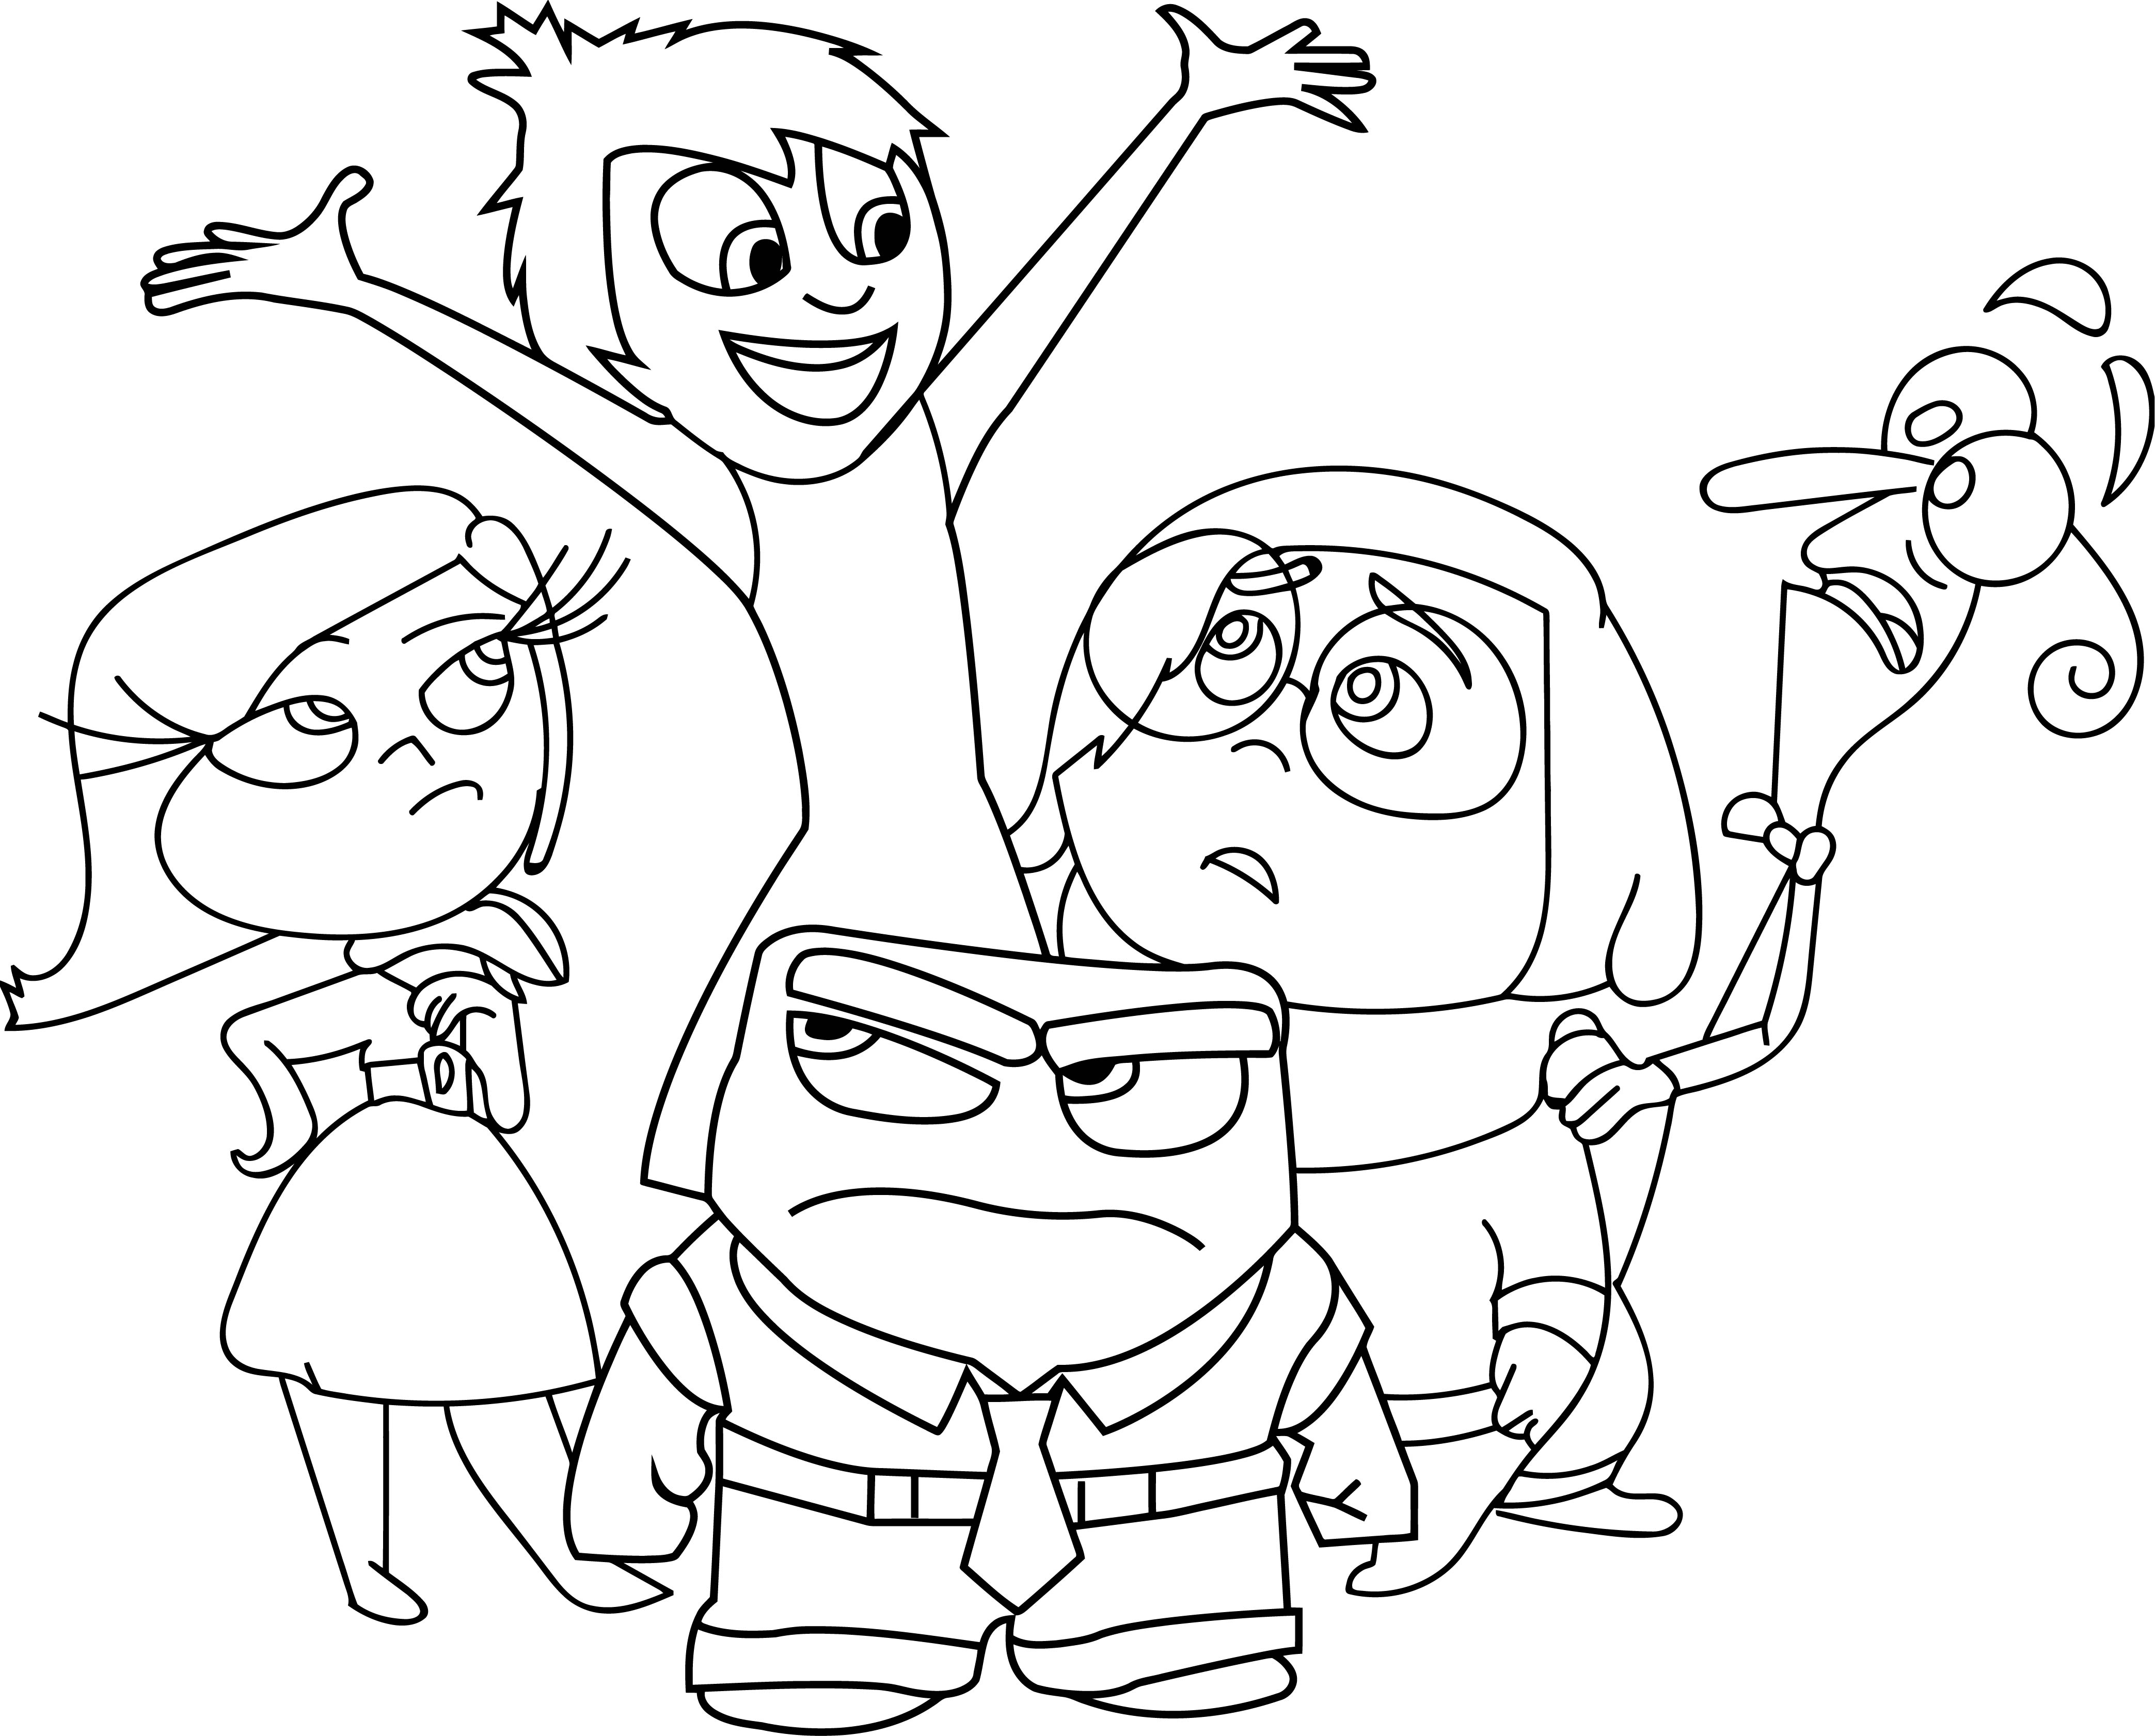 Inside Out Family Picture Coloring Page | Wecoloringpage.com